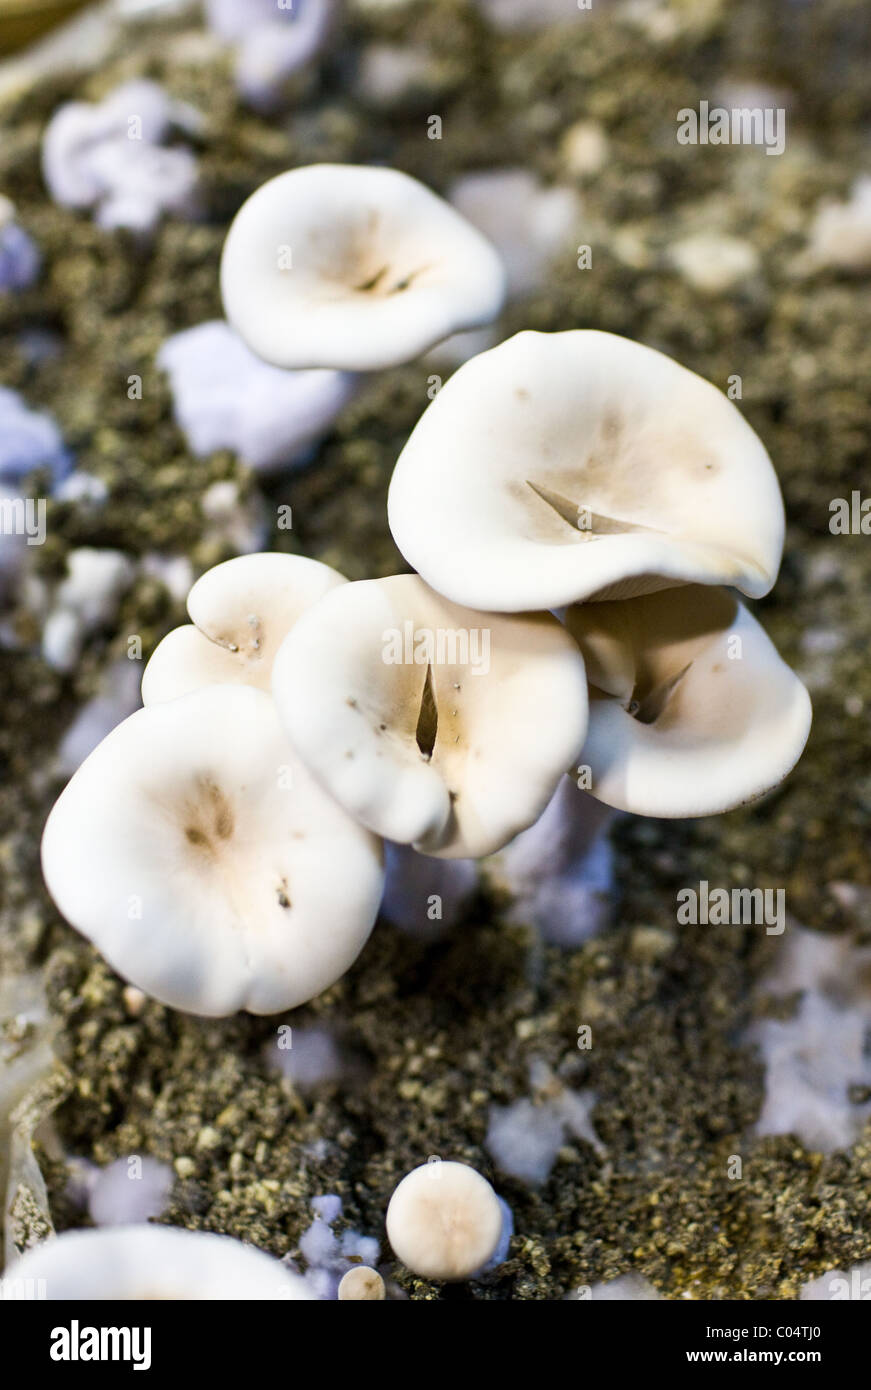 Wood blewit, Lepista nuda, mushrooms grow in underground cave at Le Saut Aux Loups at Montsoreau, France Stock Photo